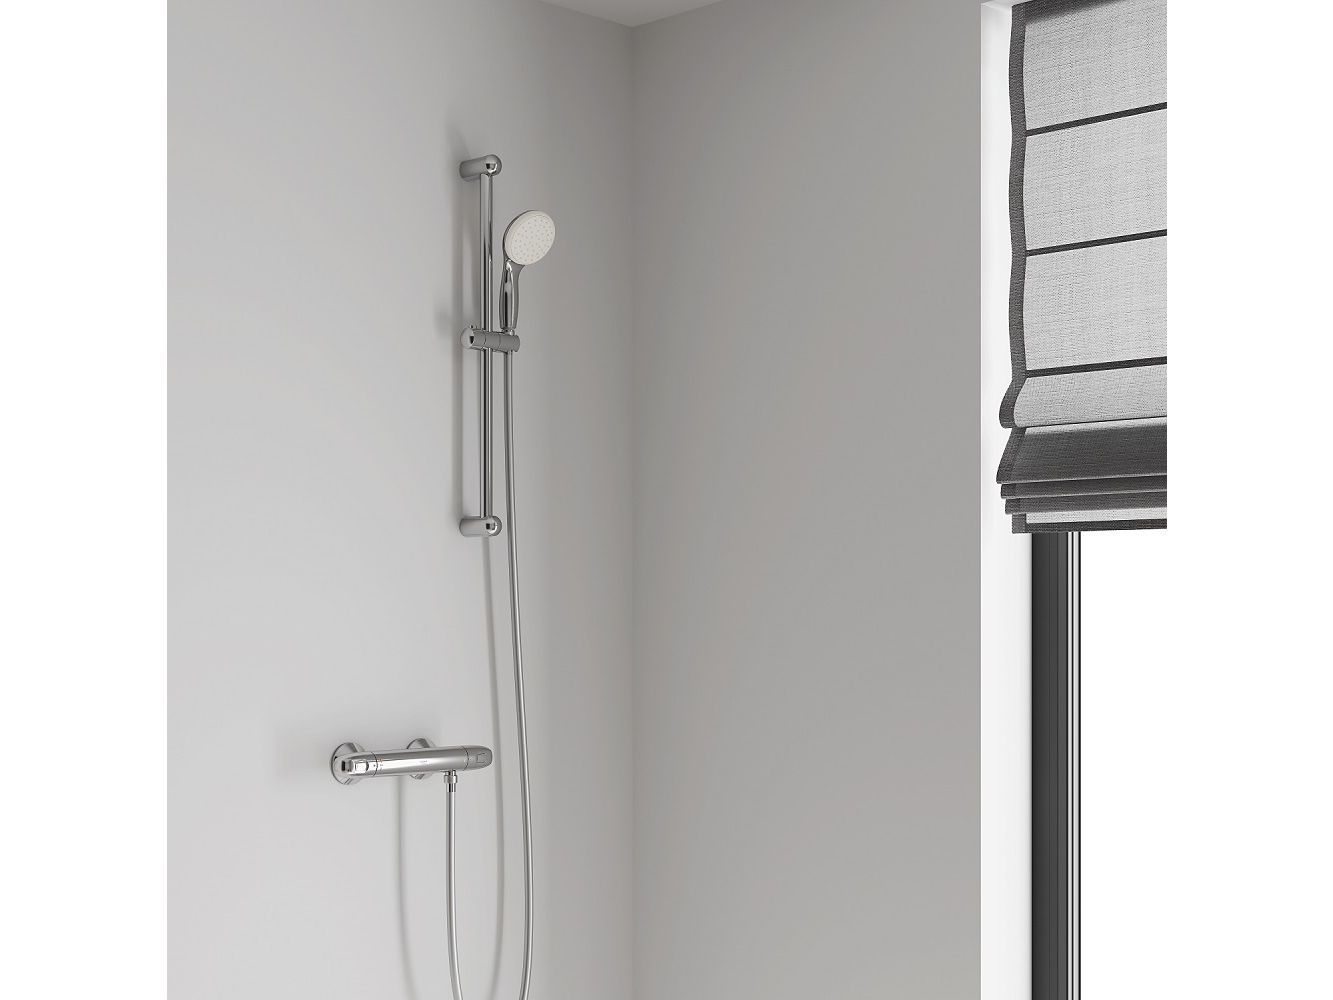 grohe-grohtherm-1000-duschset